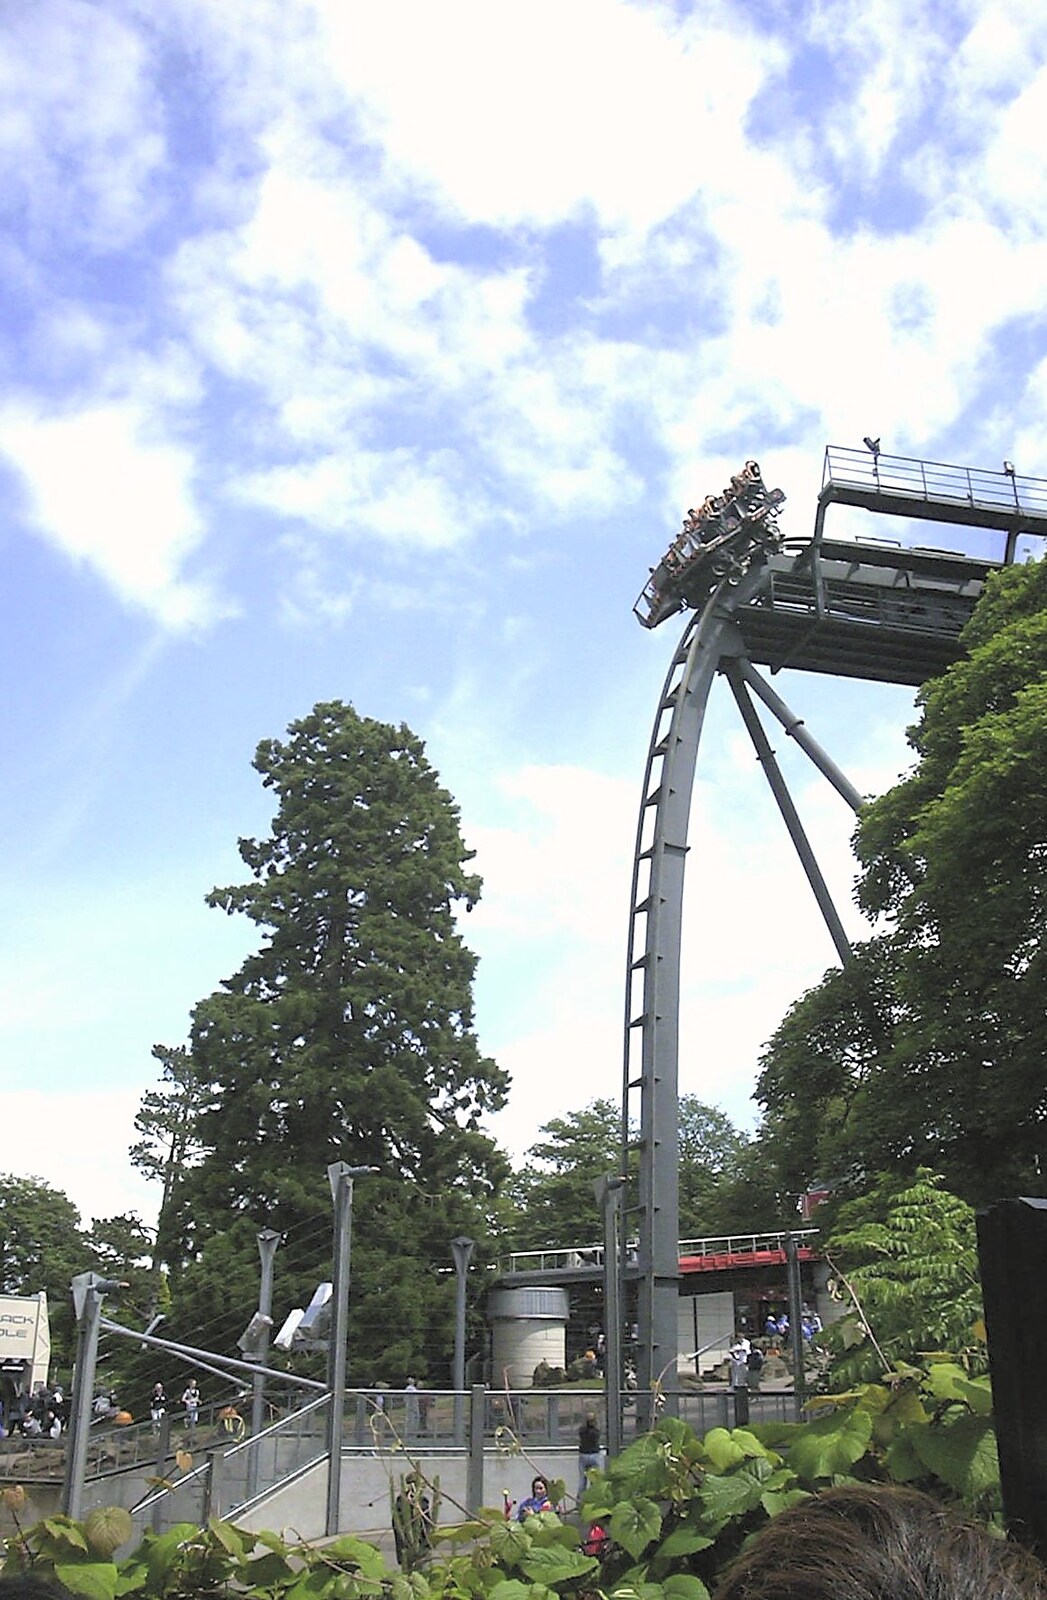 A Trip to Alton Towers, Staffordshire - 19th June 2004: Oblivion is ready to drop